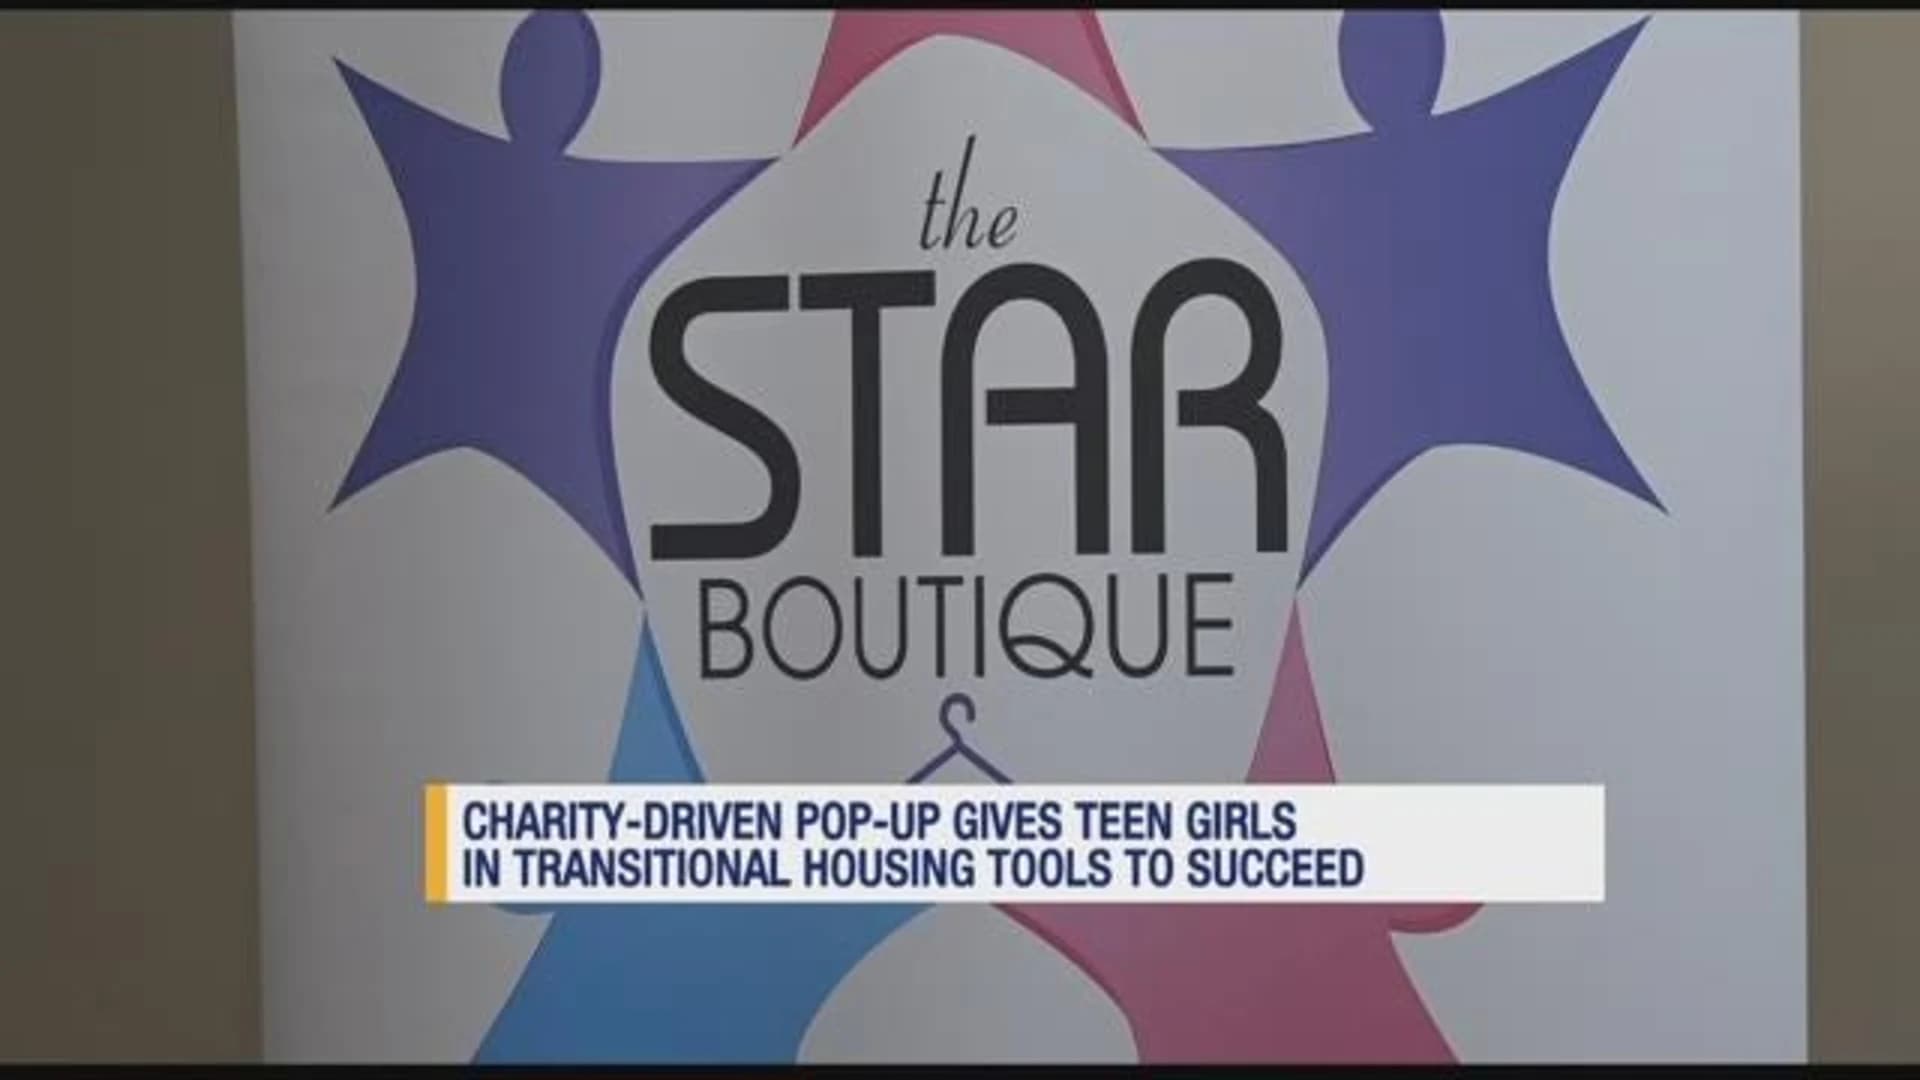 Pop-up boutique aims to give girls a boost in confidence